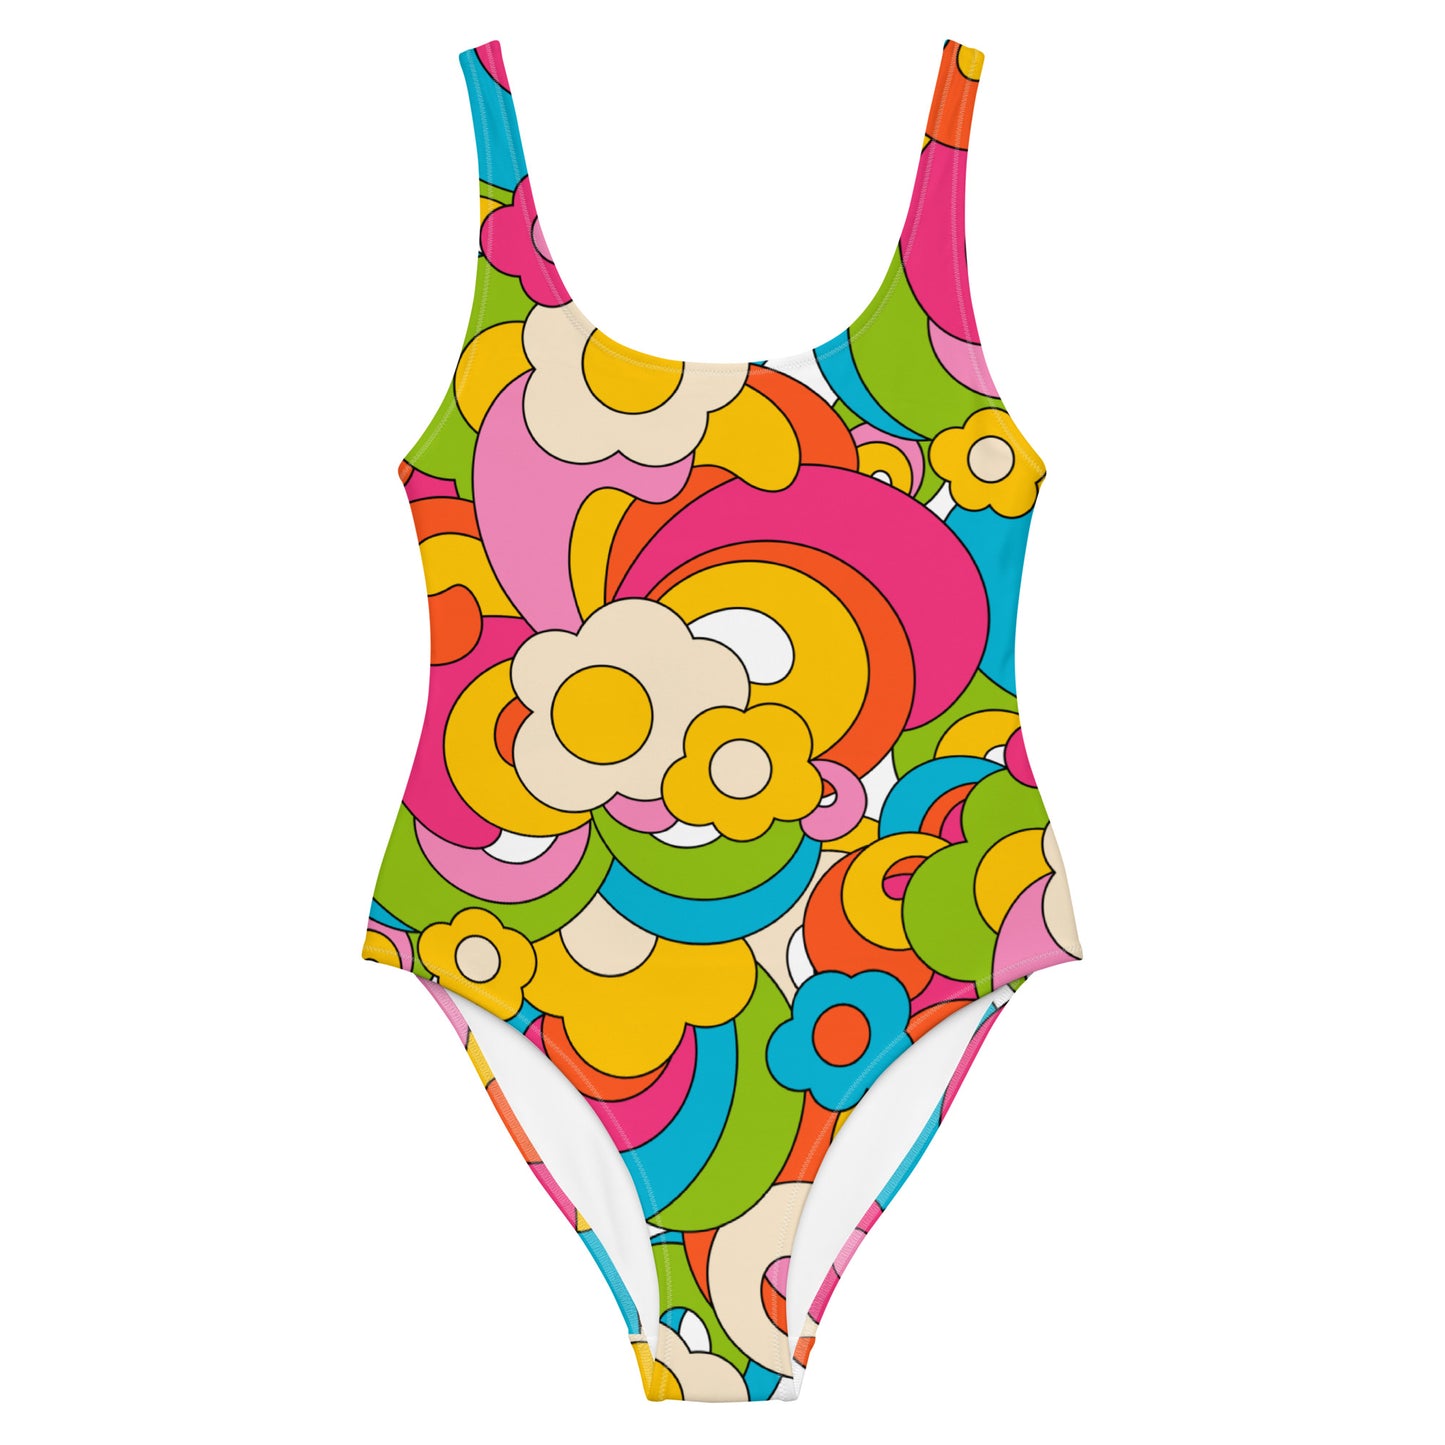 FLORENCE happy - One-Piece Swimsuit